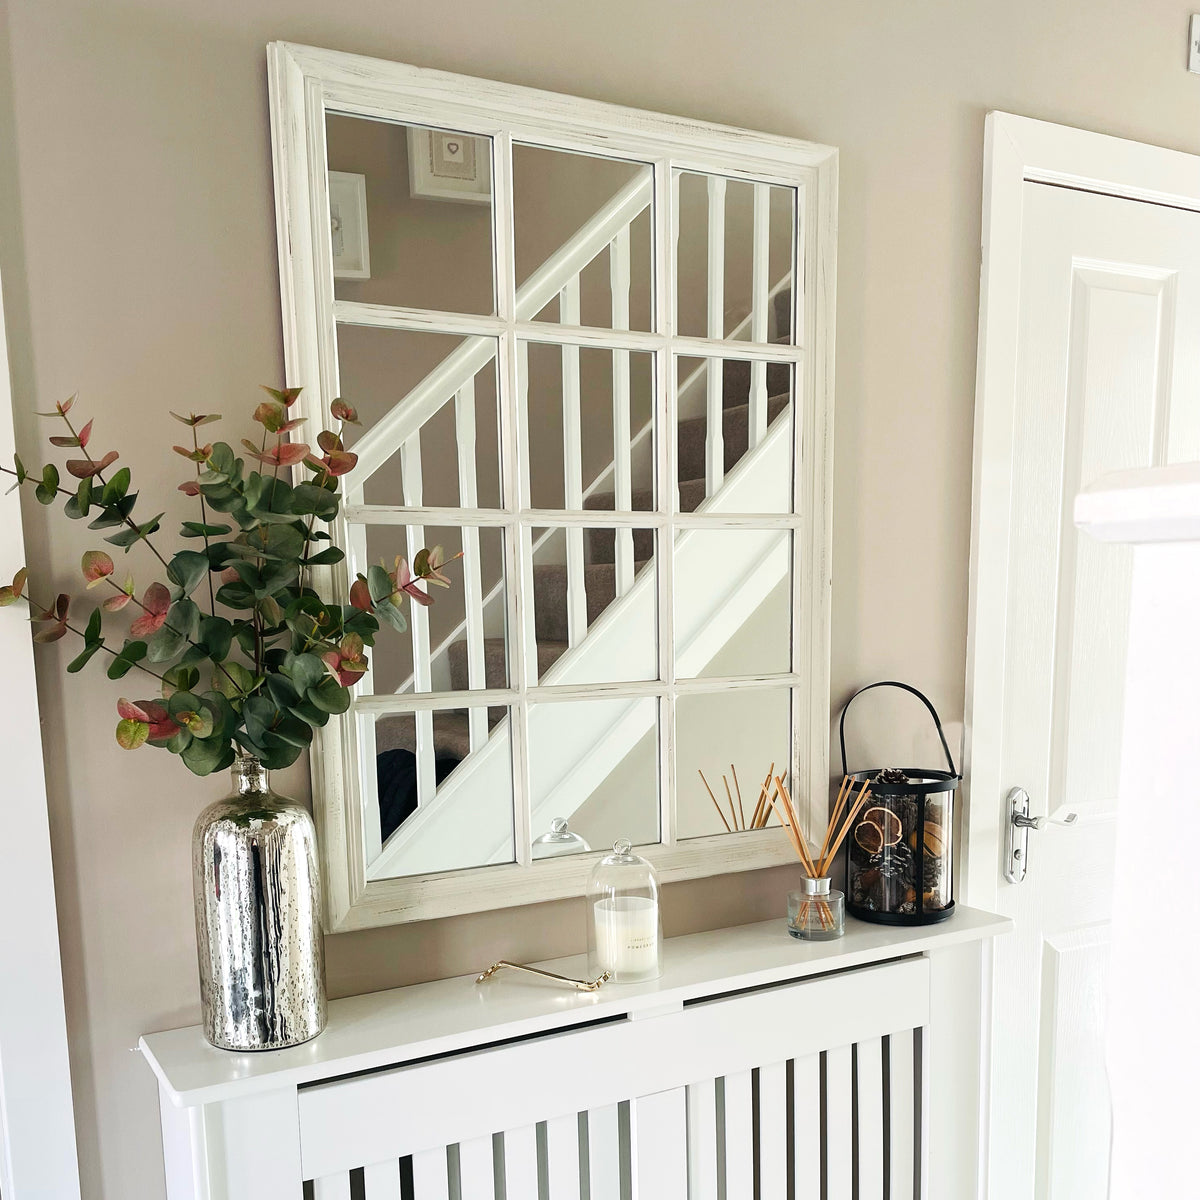 White Shabby Chic Full Length Window Mirror above console table